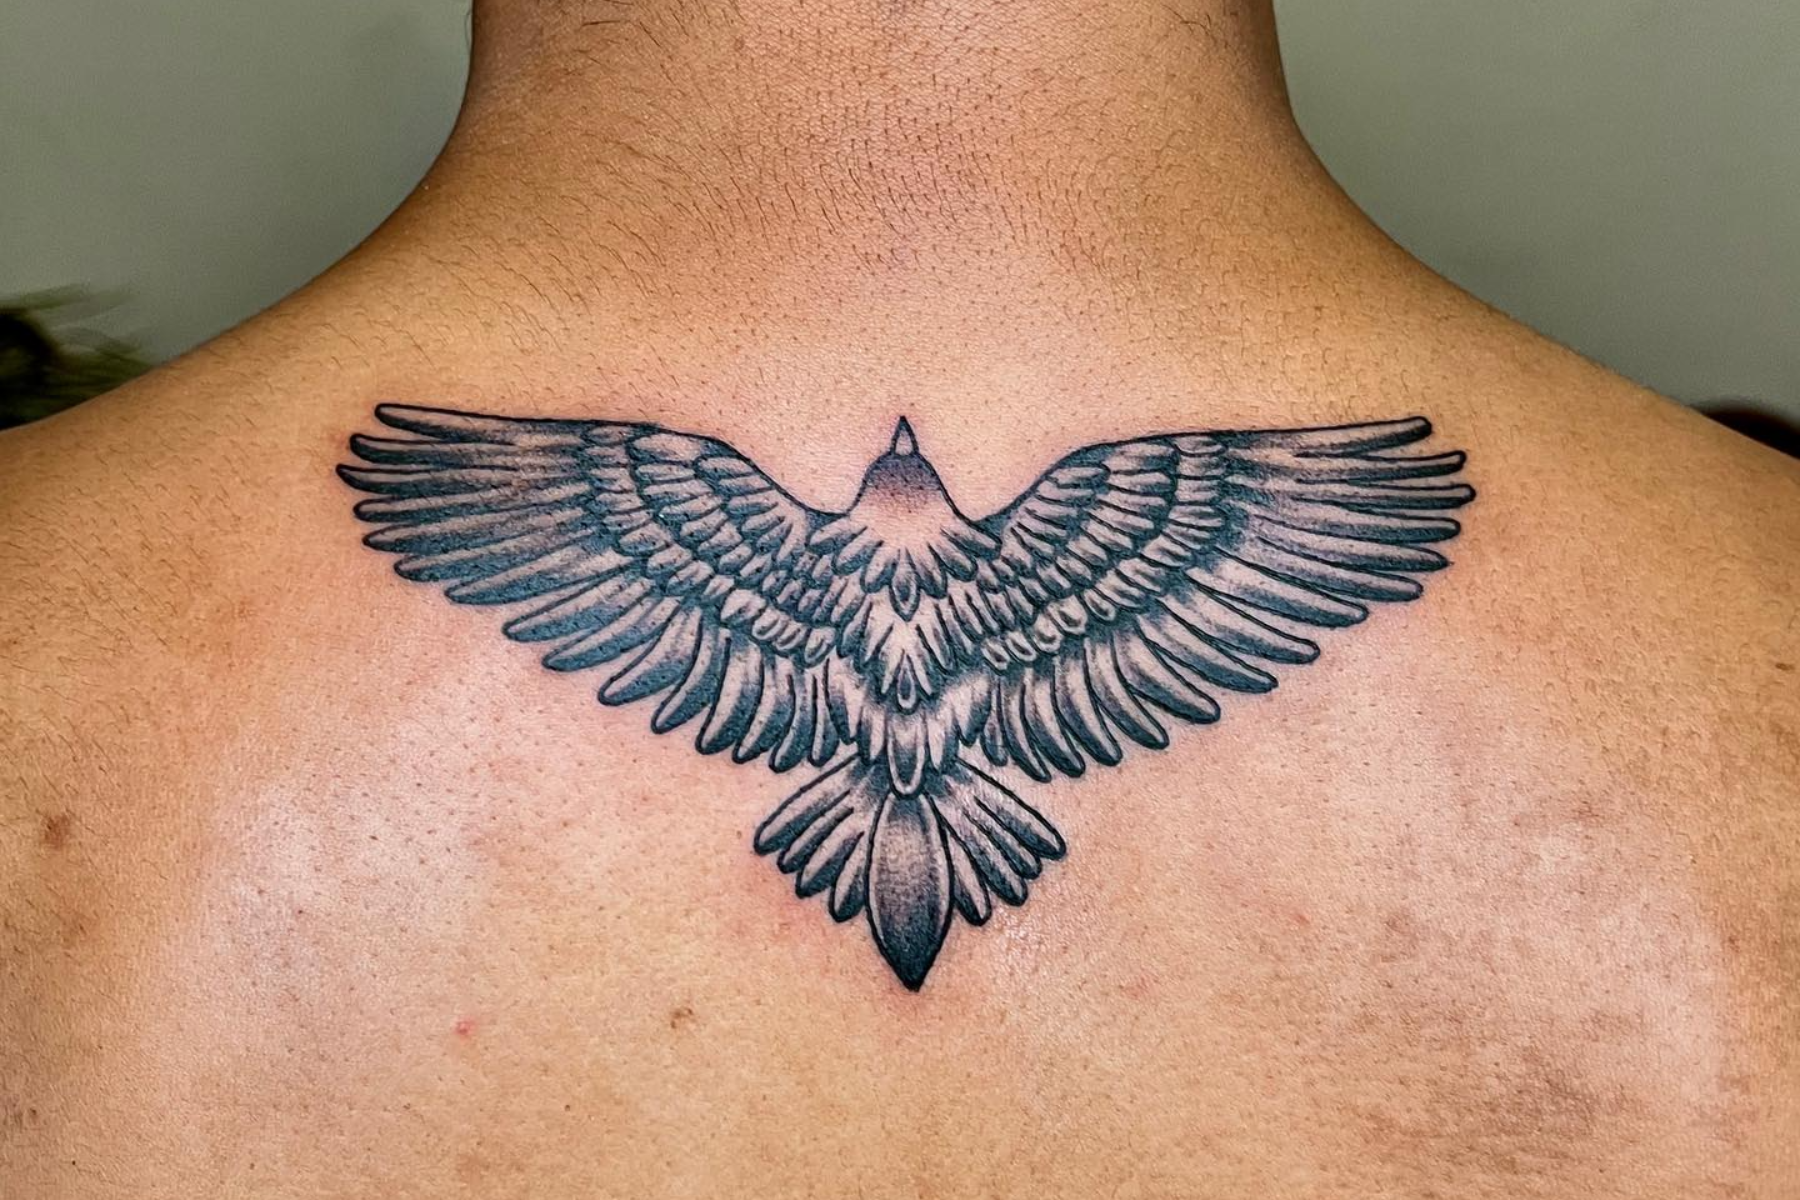 A man has an eagle tattoo on his upper back